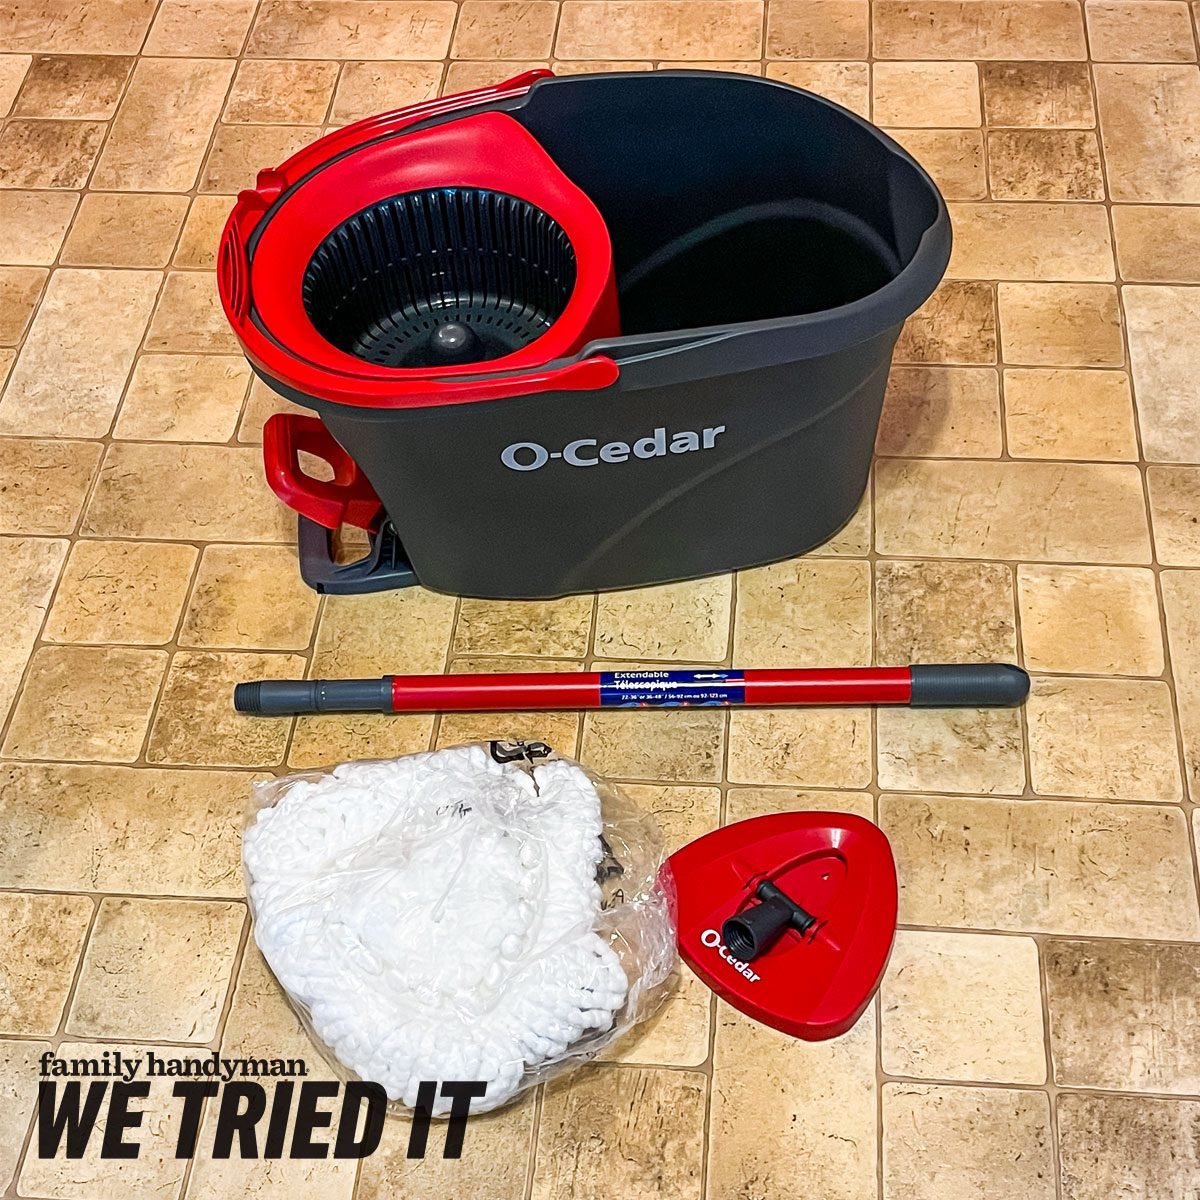 The Viral O-Cedar Spin Mop Is a Beloved Cleaning Tool, So We Tested It Out